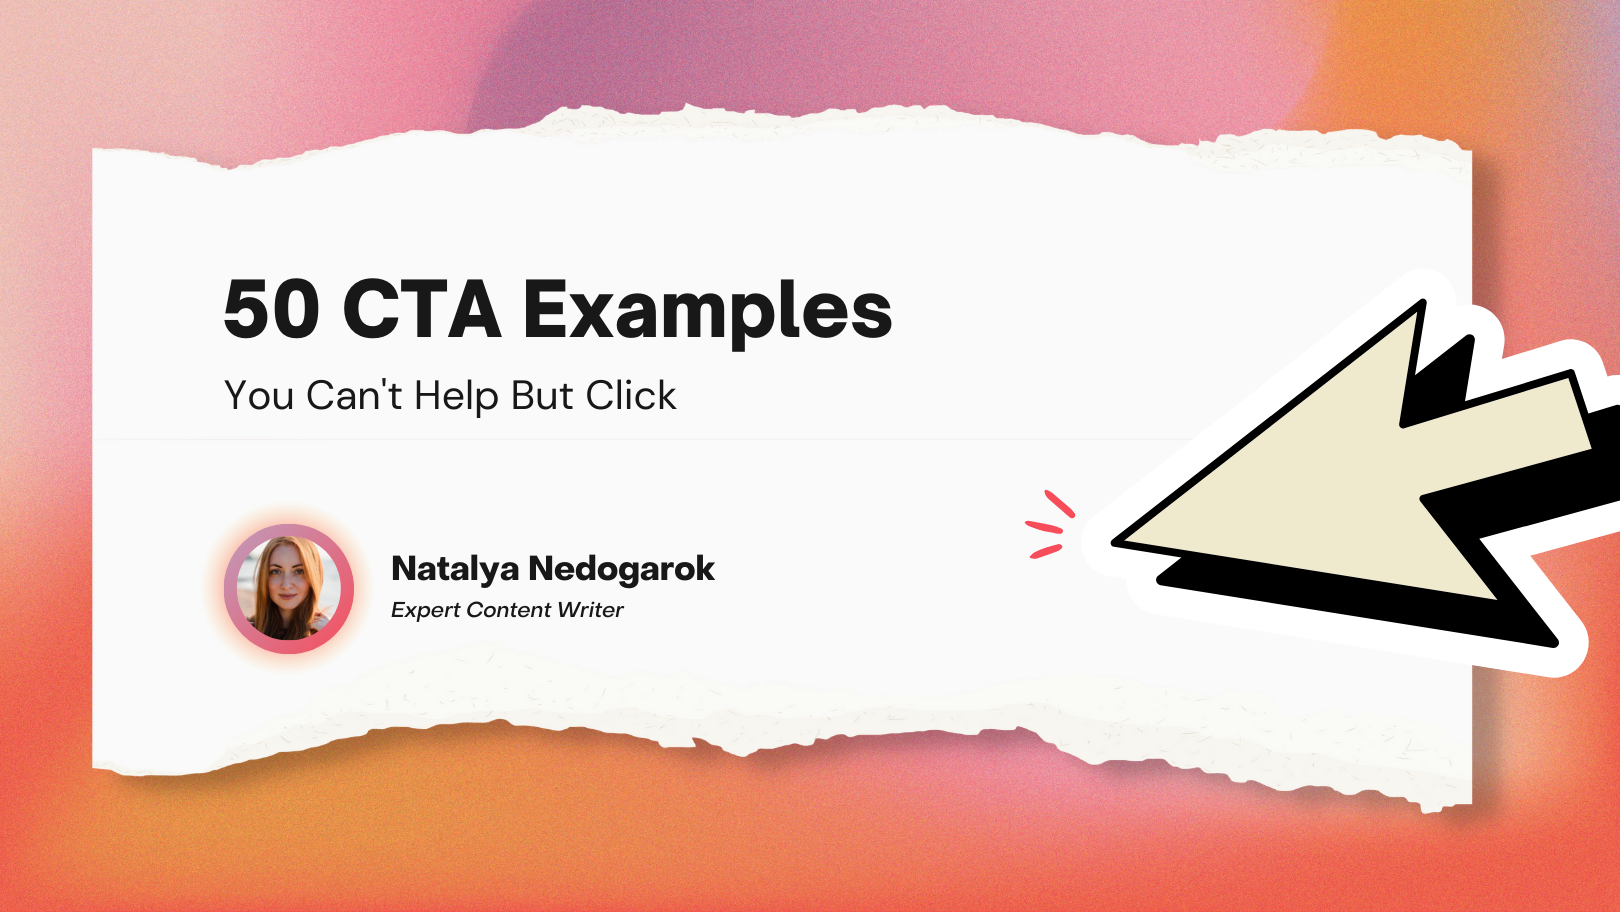 AV_50-cta-examples-you-cant-help-but-click-3